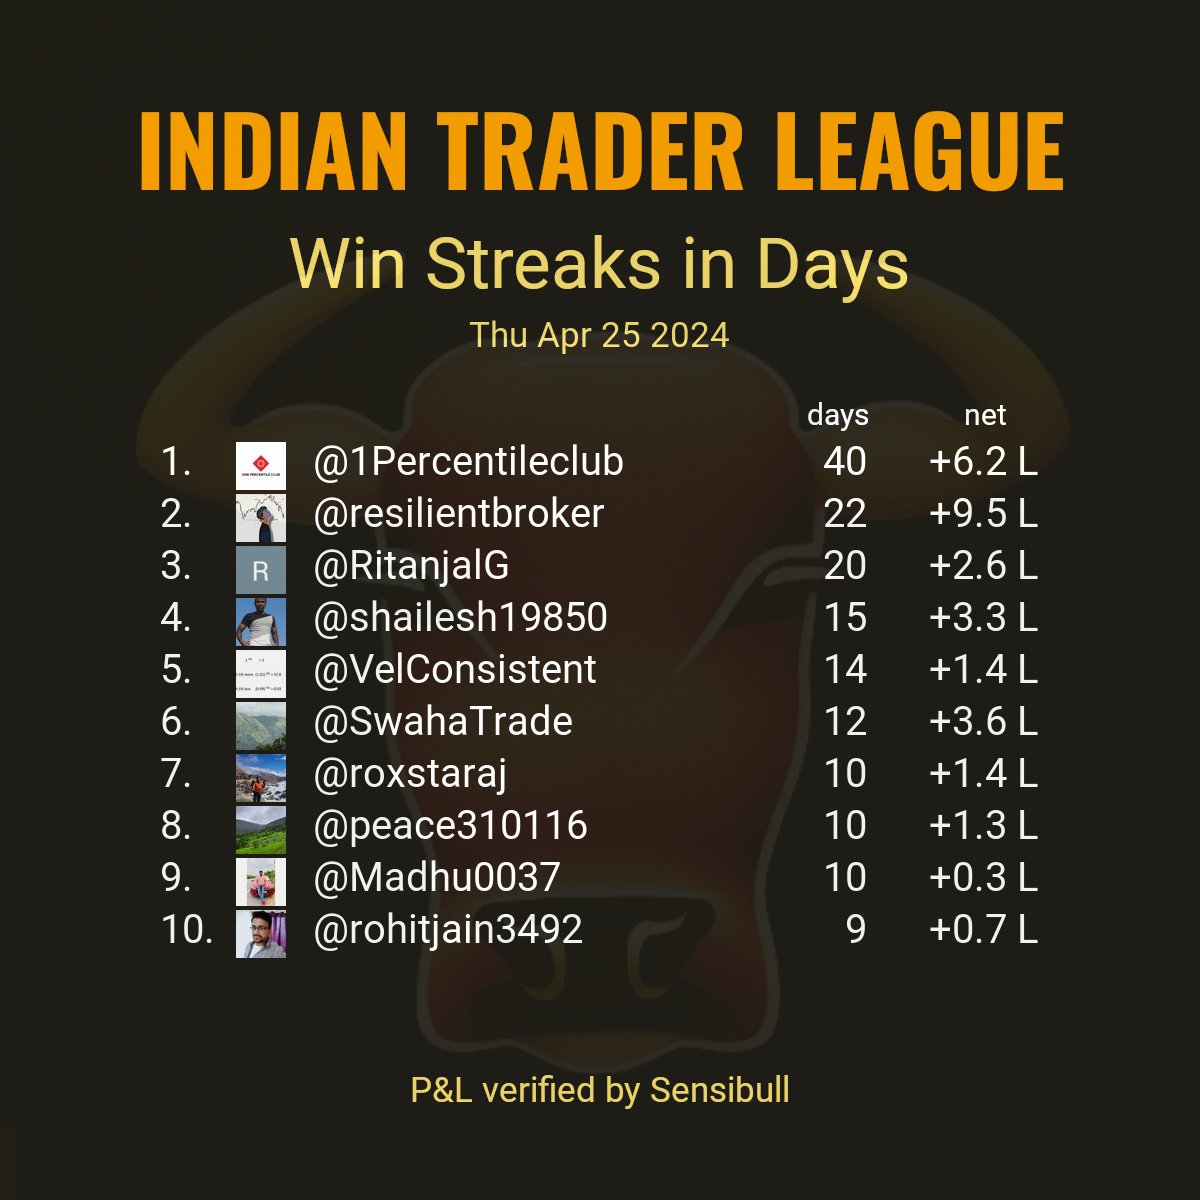 Top 10 longest win streaks reported by stock market participants as of trade date Thu Apr 25 2024. Criteria: Continuous days of #VerifiedBySensibull P&L with profit (>0.0). Sorted by number of days. Only realized P&L is considered.